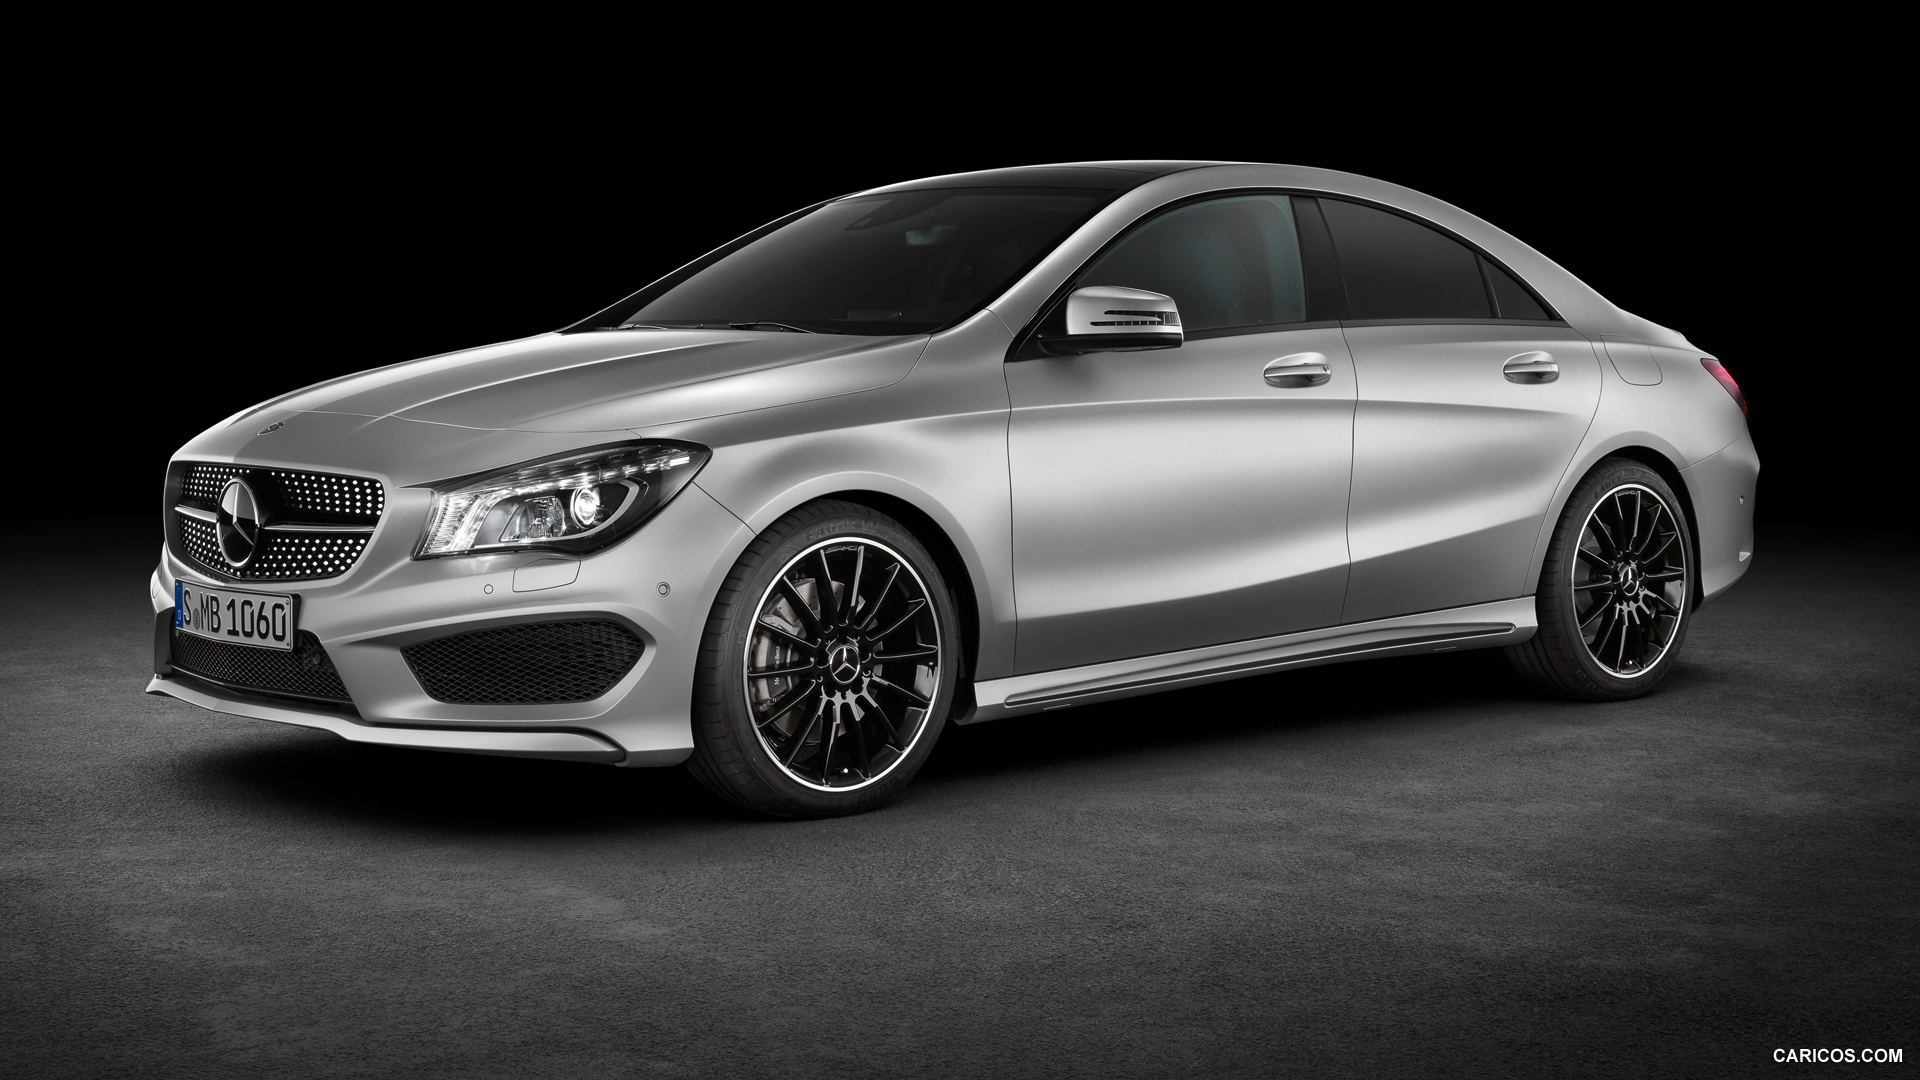 2014 Mercedes-Benz CLA-Class CLA 250 Edition 1 - Front, #75 of 183